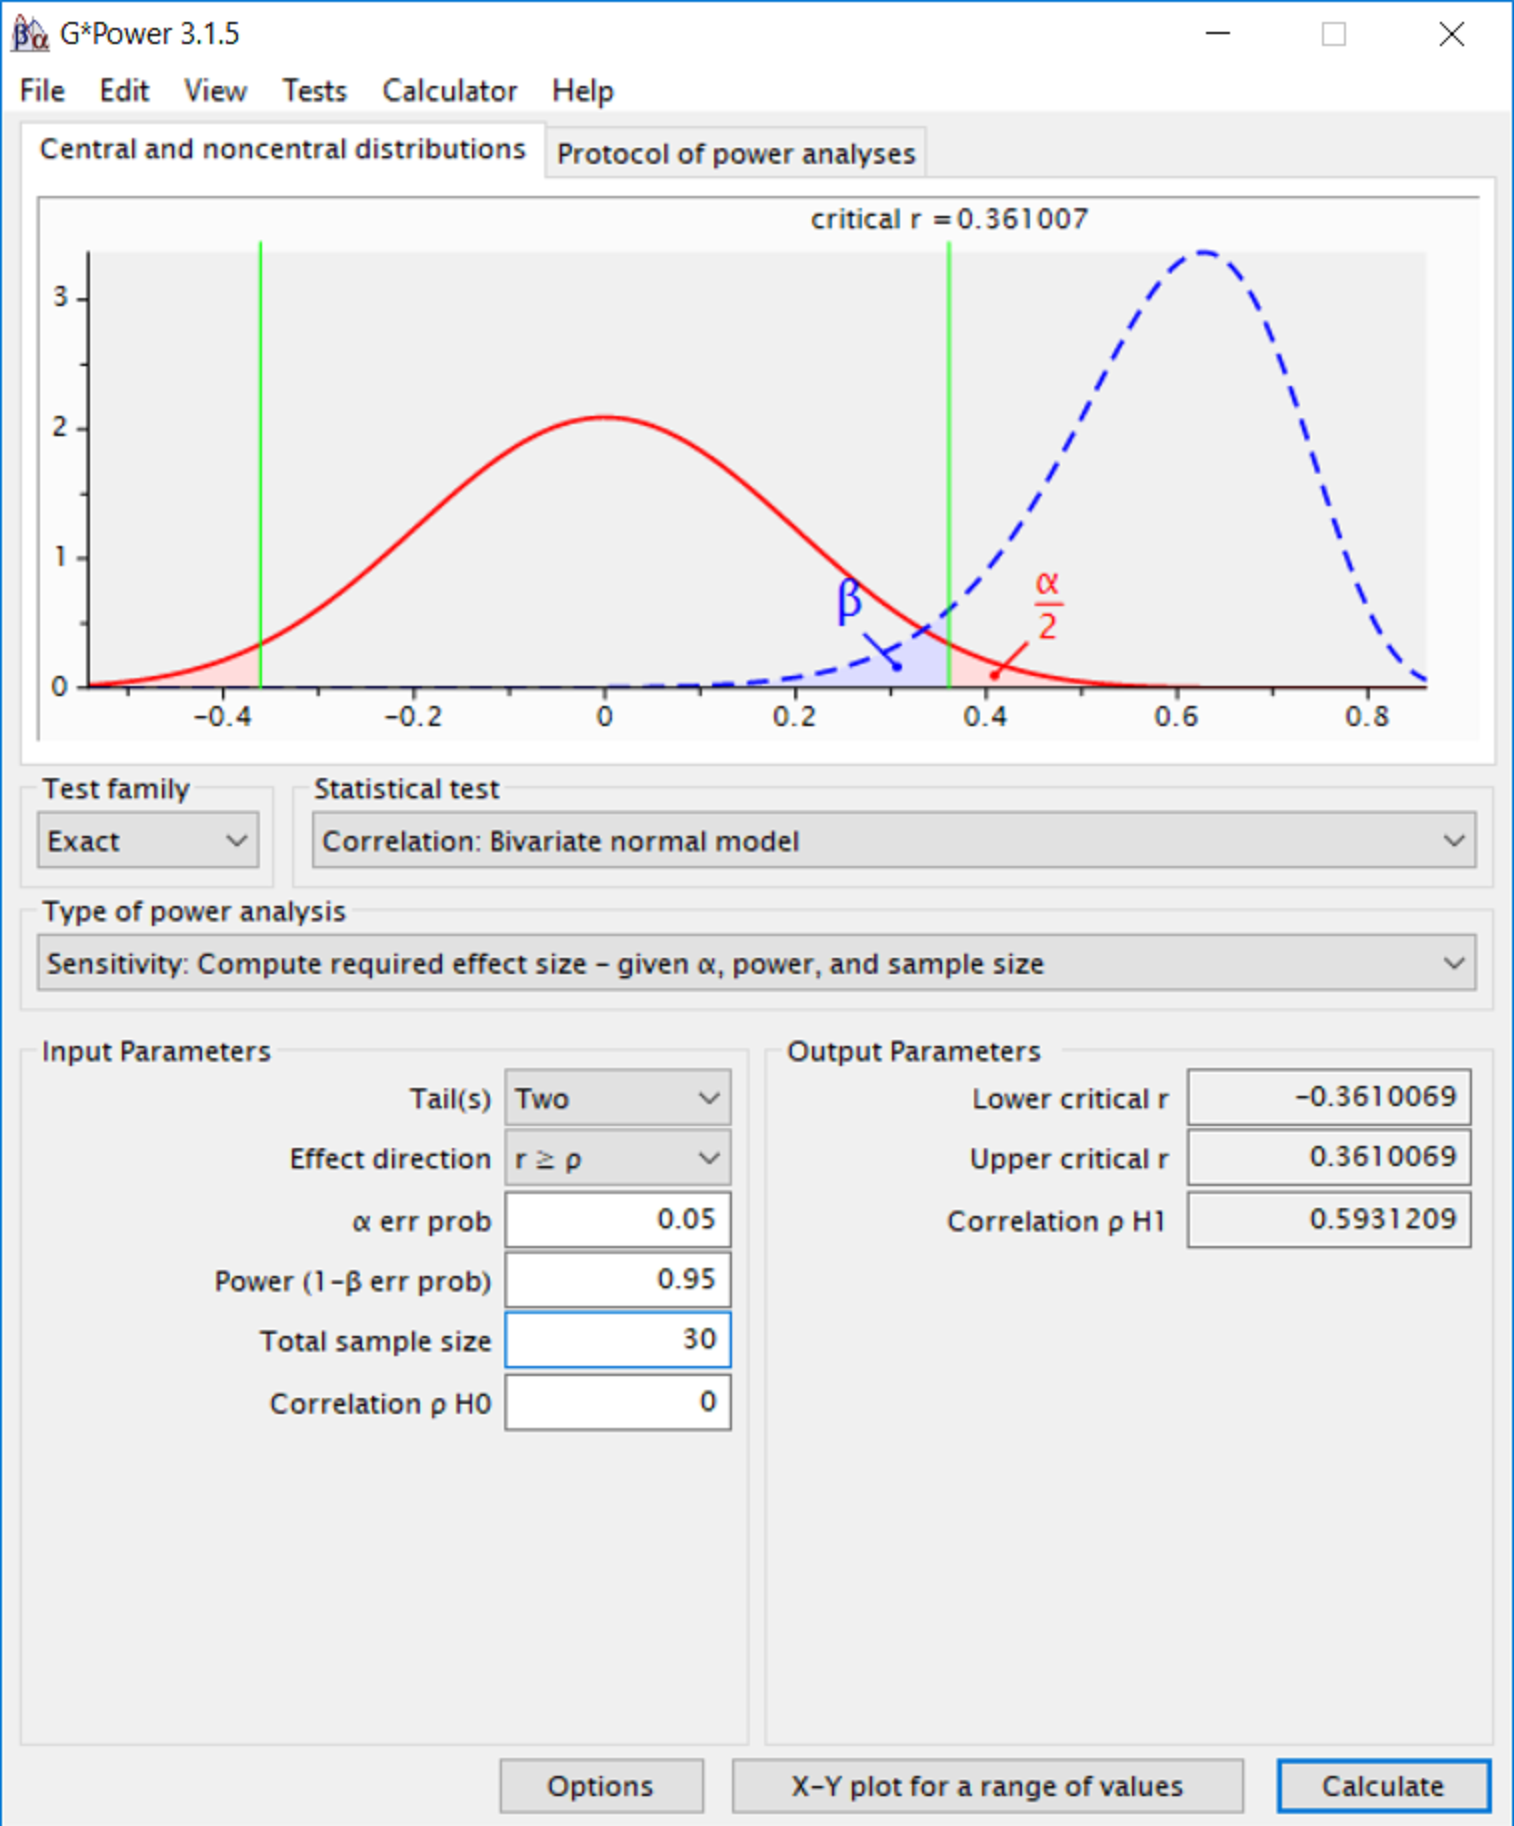 The critical correlation of a test based on a total sample size of 30 and α = 0.05 calculated in G*Power.